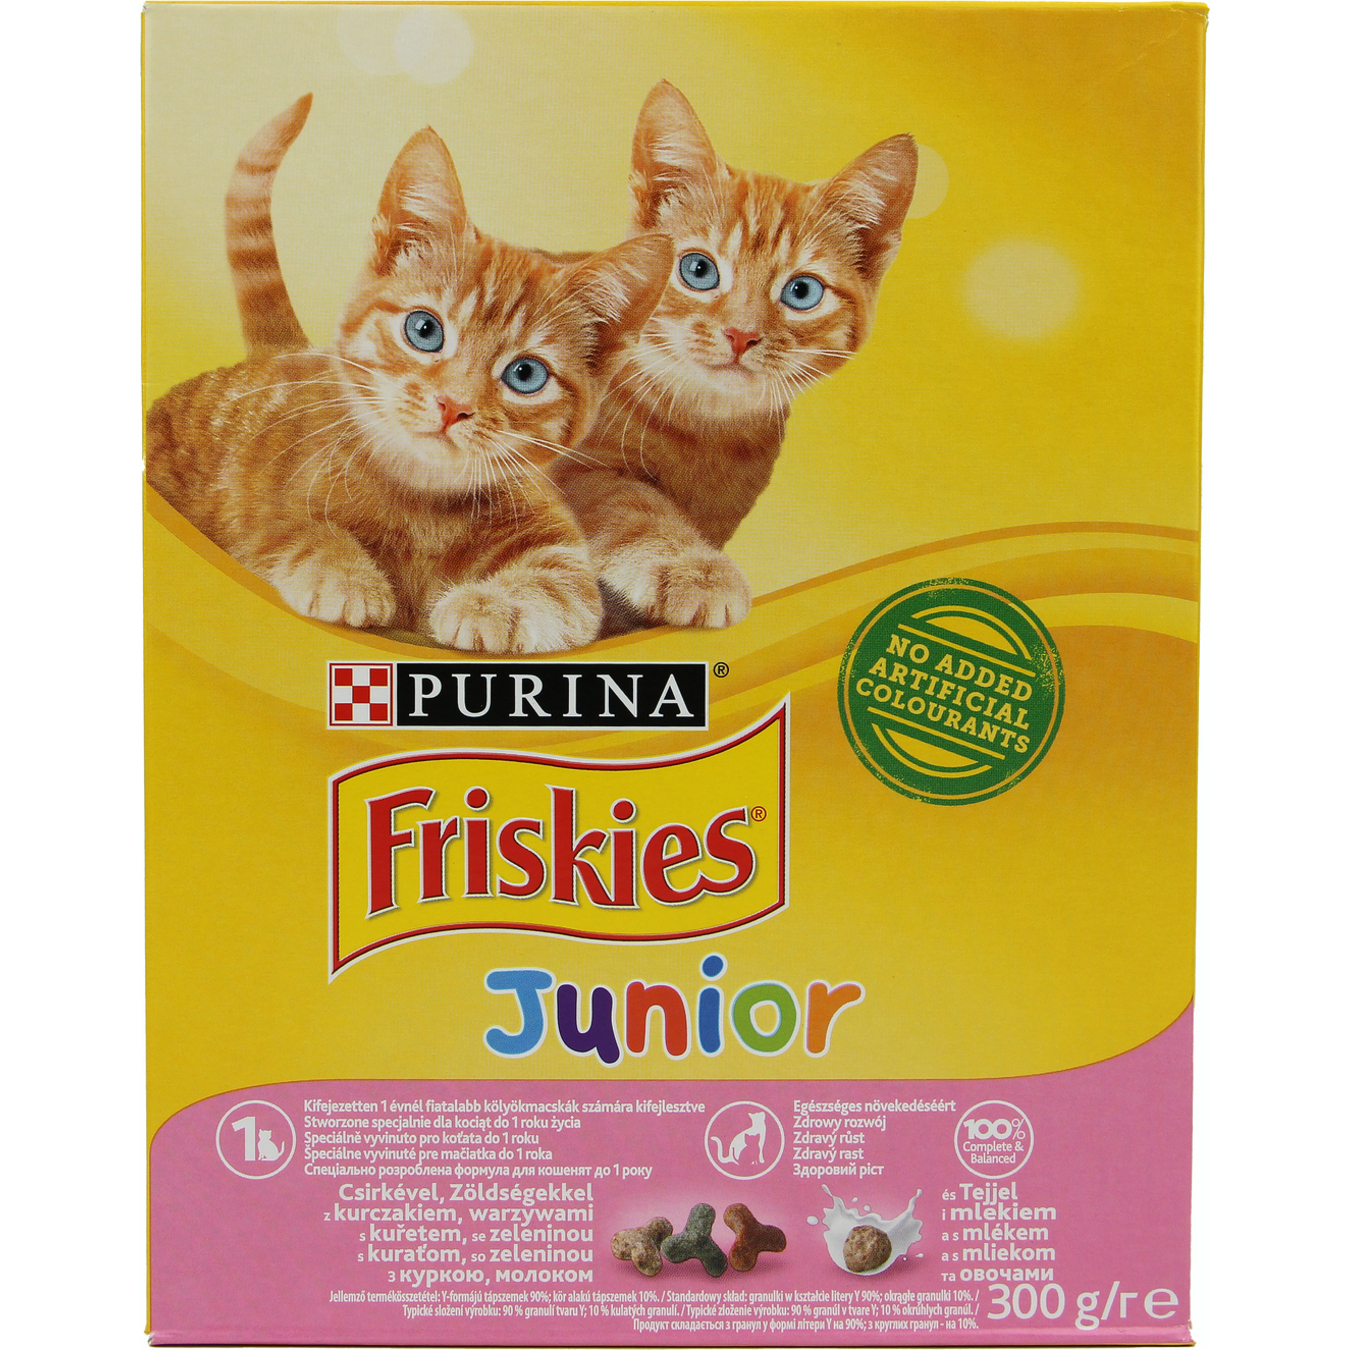 Purina Friskies Junior Dry Food for Kittens with Chicken, Milk and Vegetables 300g